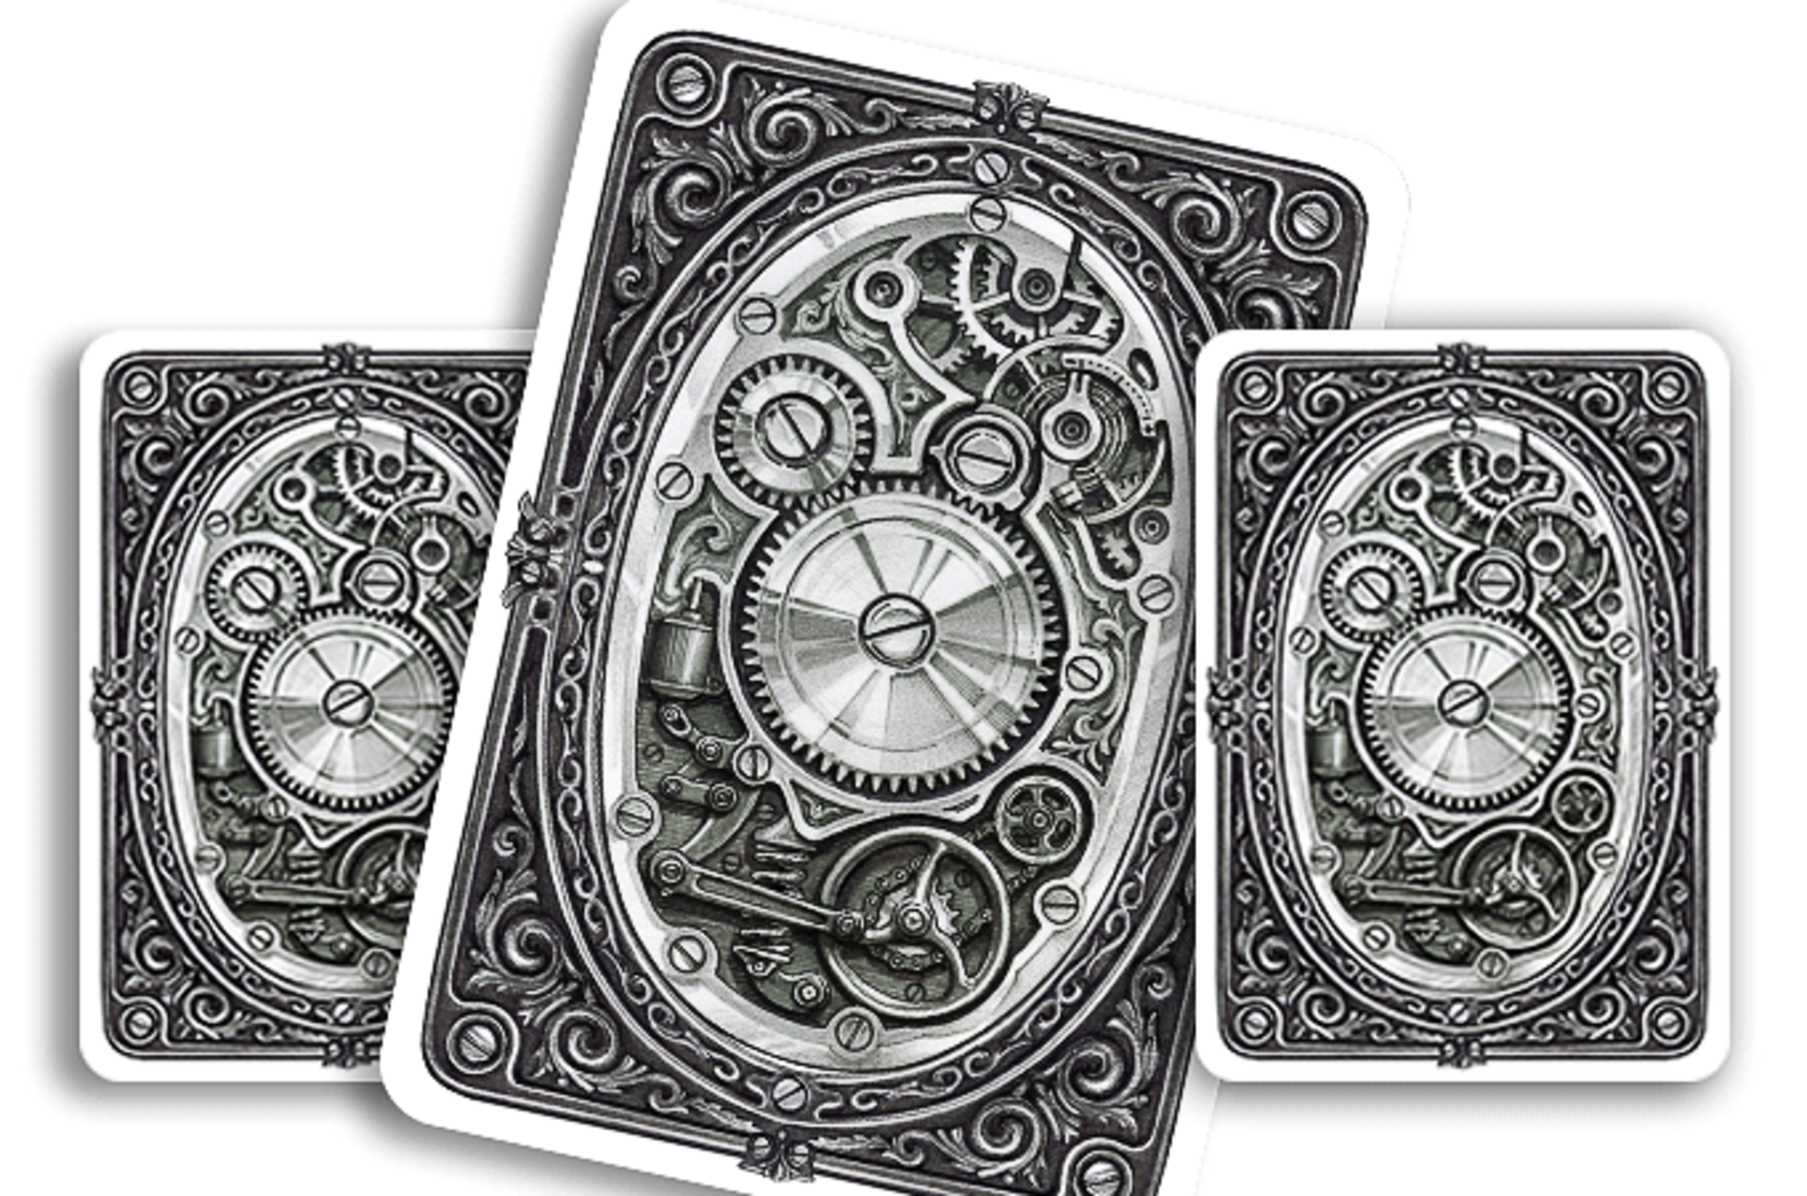 Aristo Steampunk Themed Playing Cards Poker Size Standard Index Single Deck 